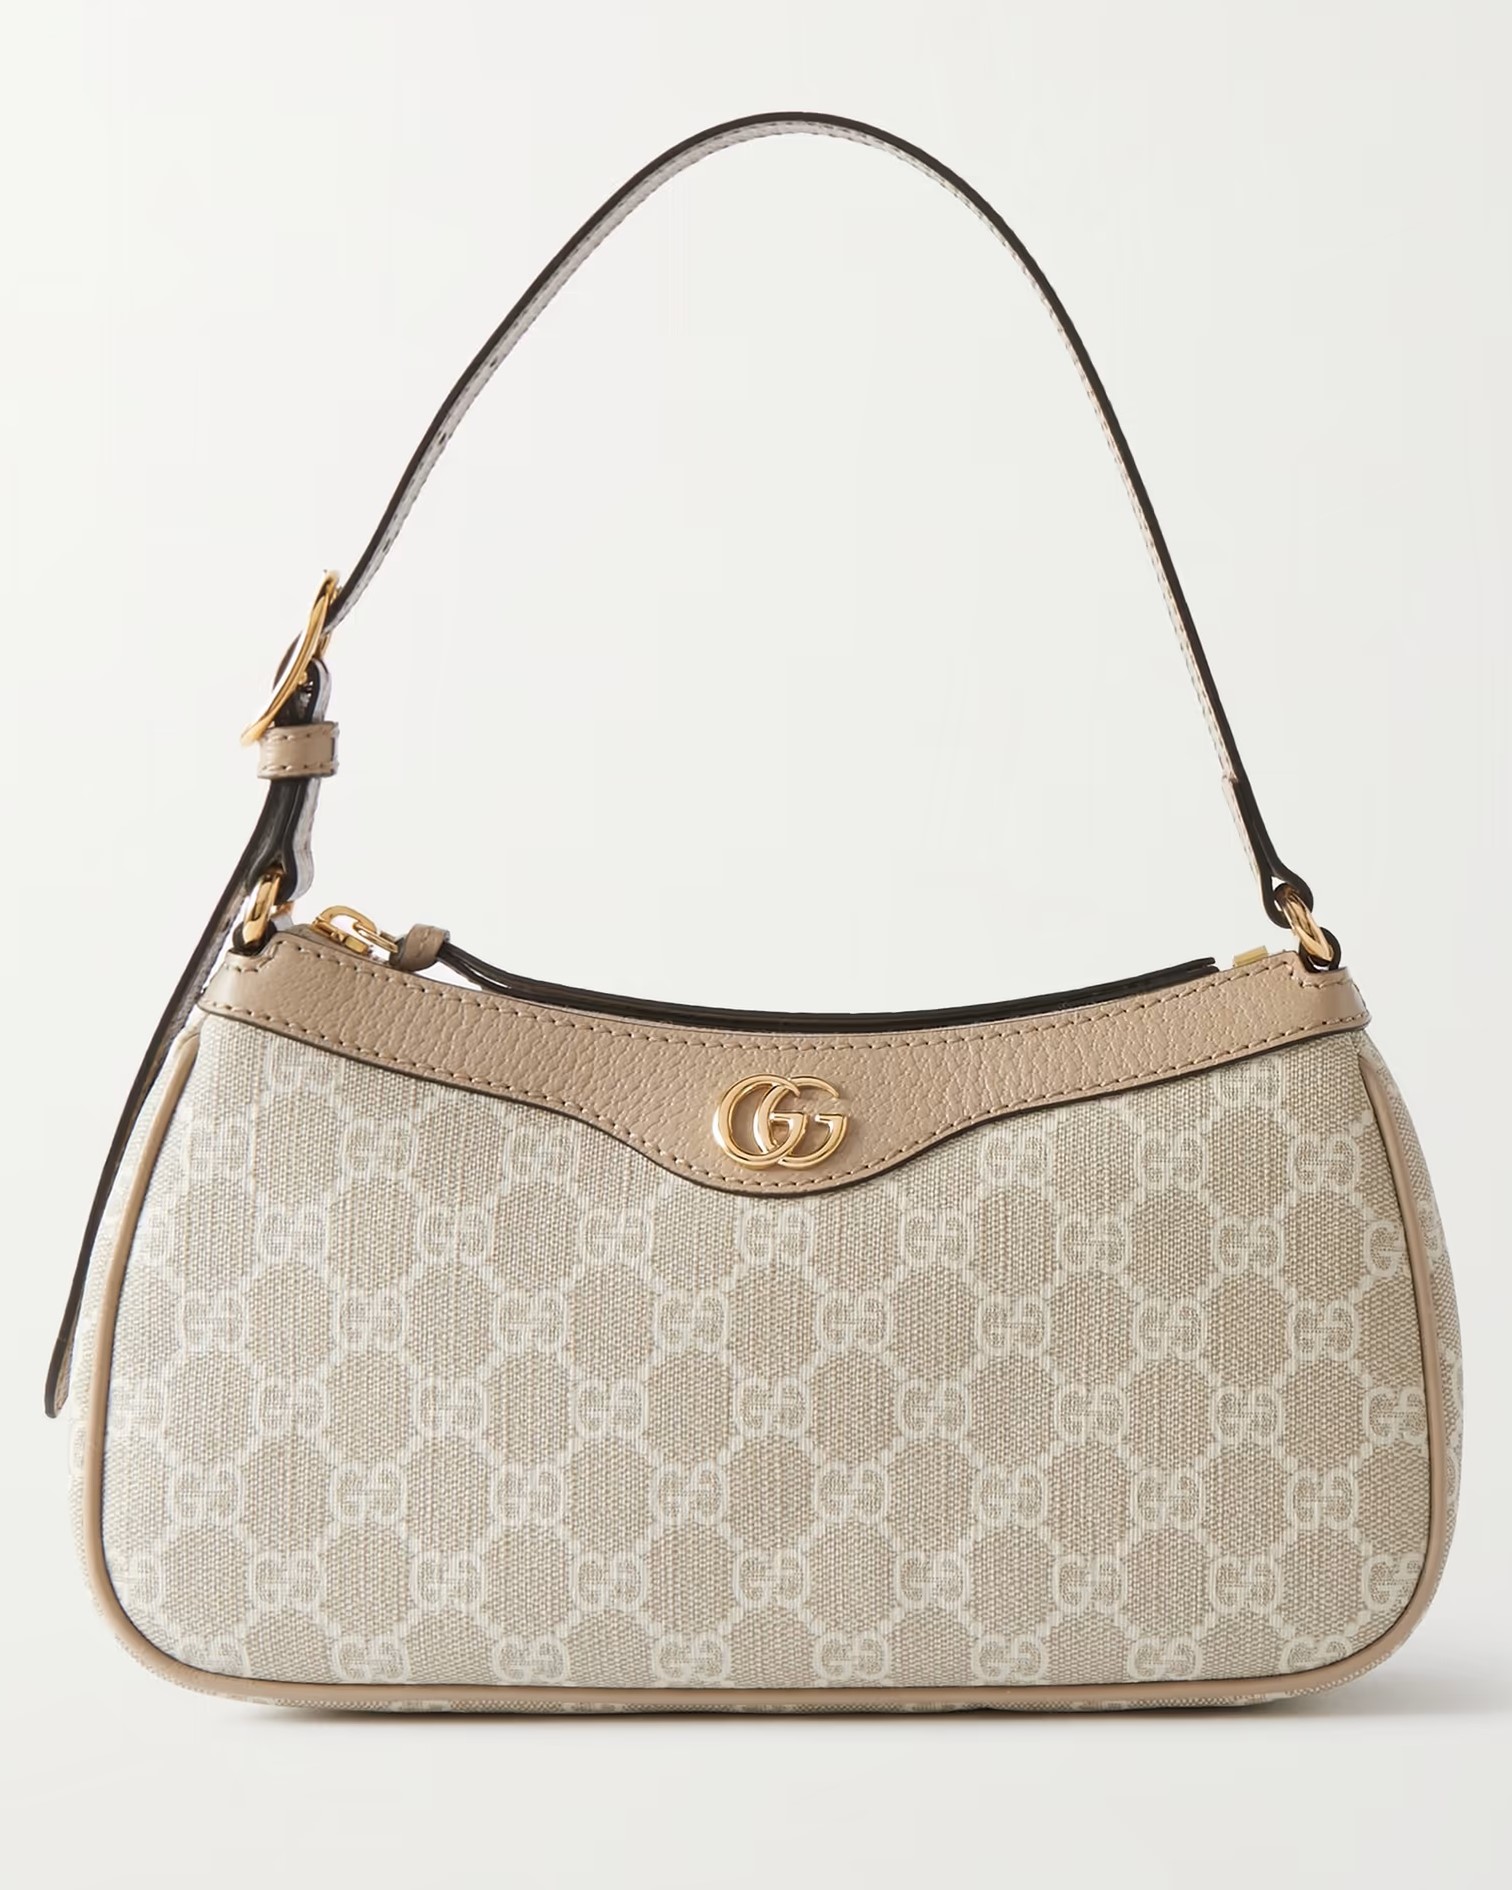 TÚI XÁCH NỮ GUCCI OPHIDIA EMBELLISHED TEXTURED LEATHER TRIMMED PRINTED COATED CANVAS SHOULDER BAG 4